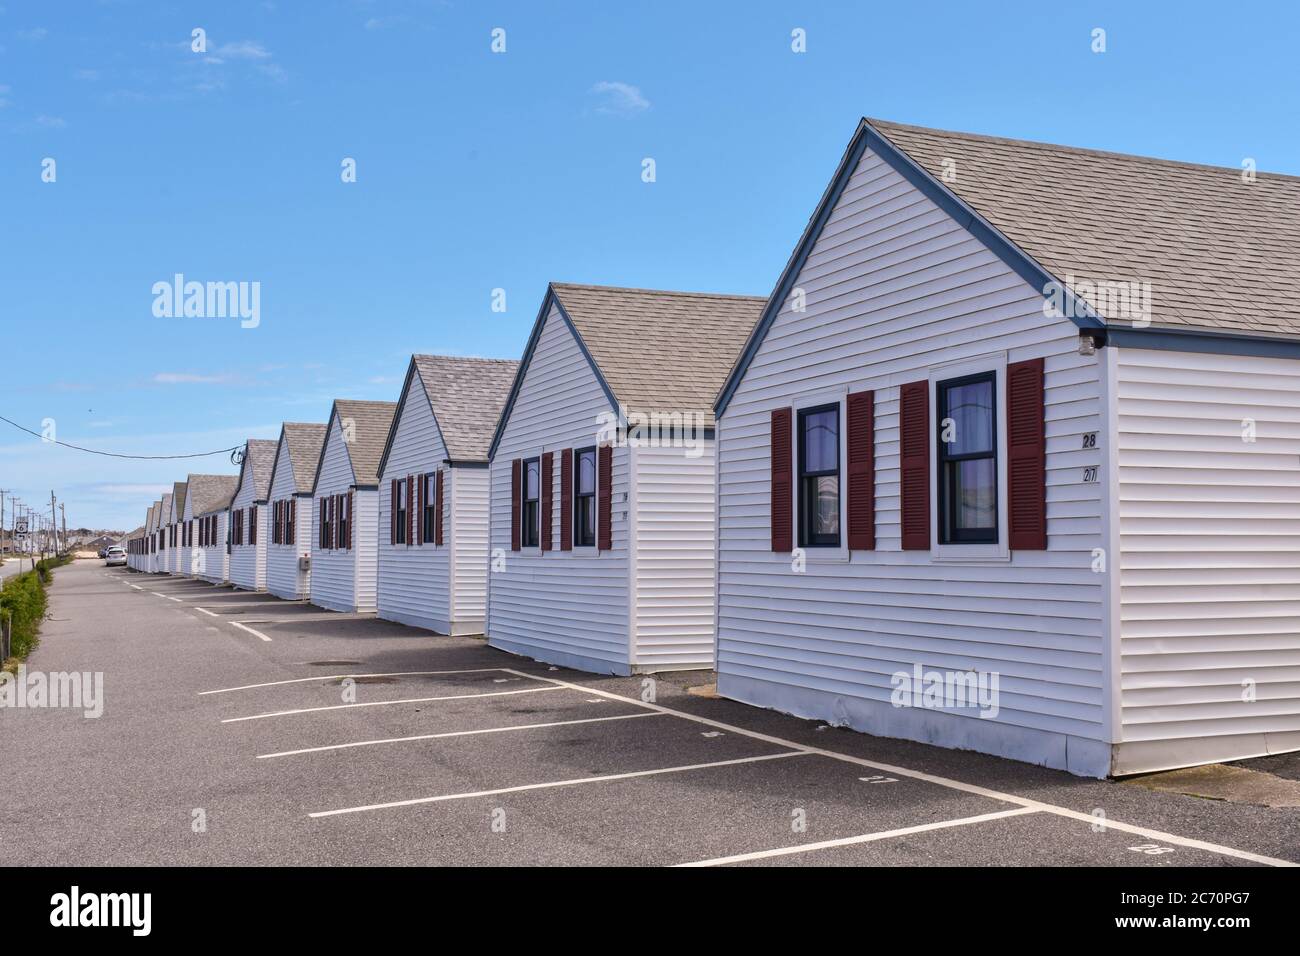 Row of rental cottages in Truro, MA next to Provincetown, MA on Cape Cod in Massachusetts Stock Photo